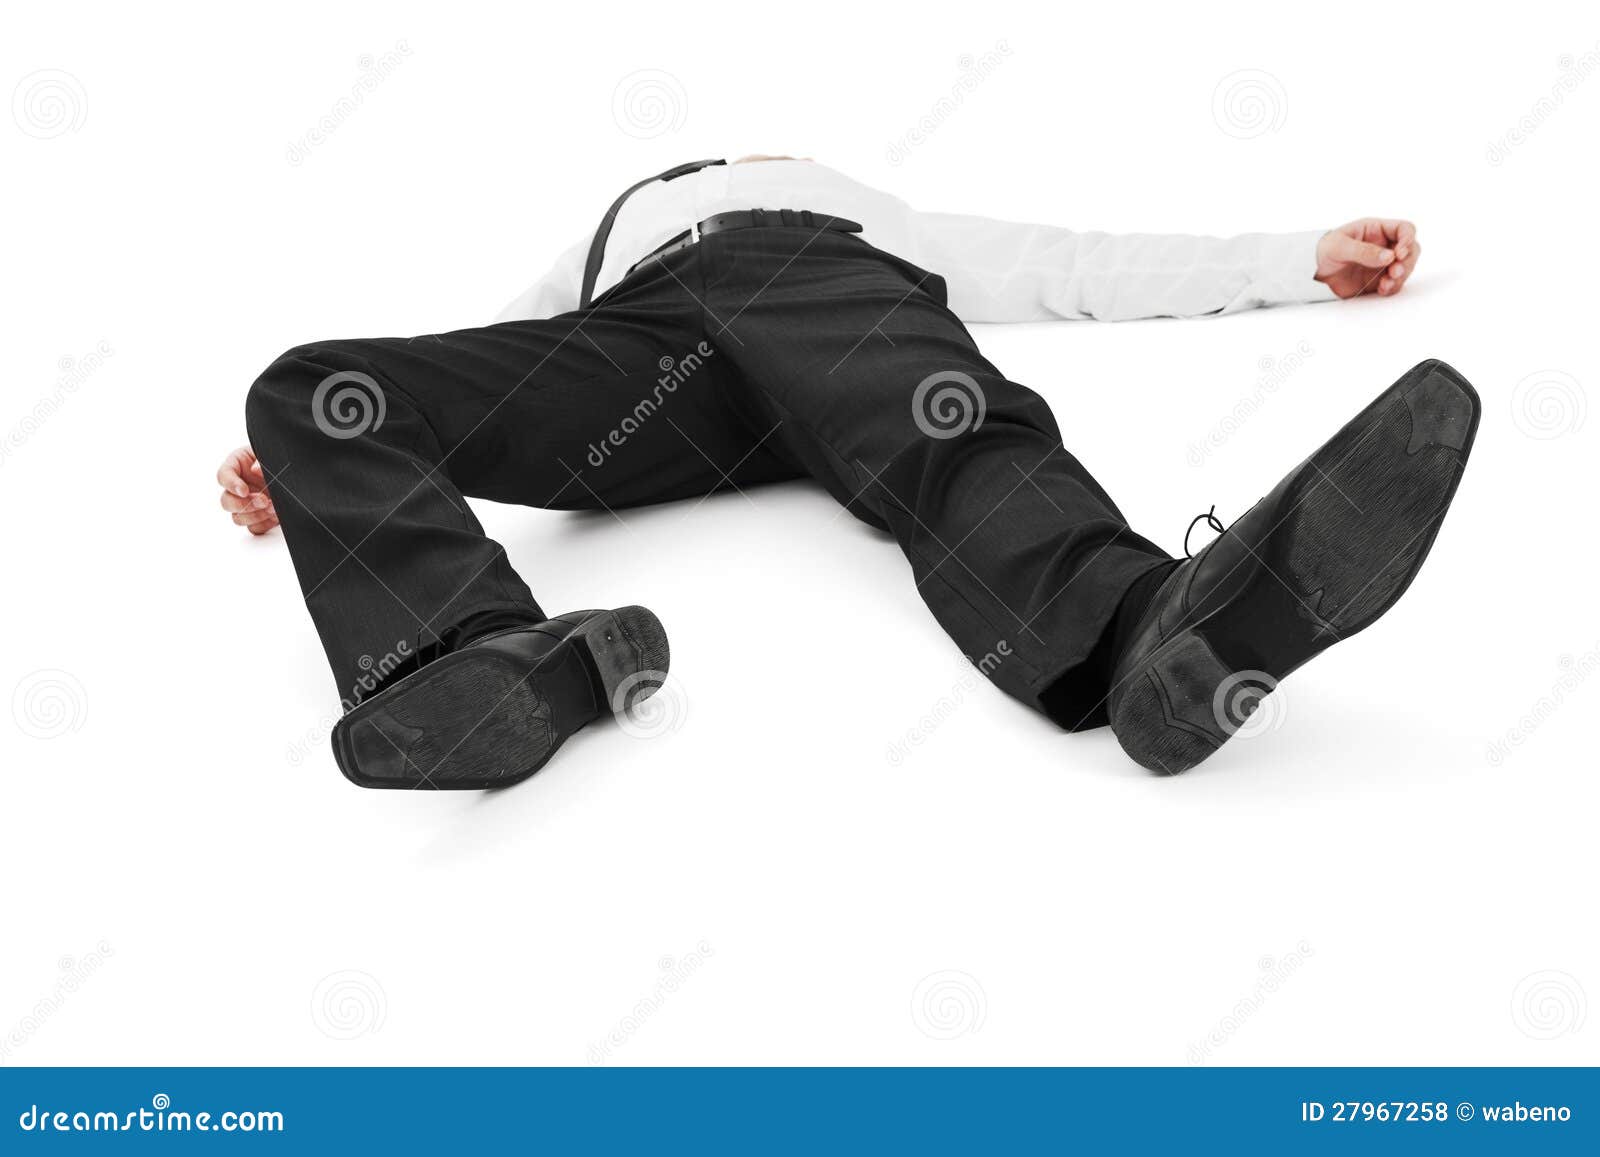 https://thumbs.dreamstime.com/z/businessman-laying-down-white-background-27967258.jpg